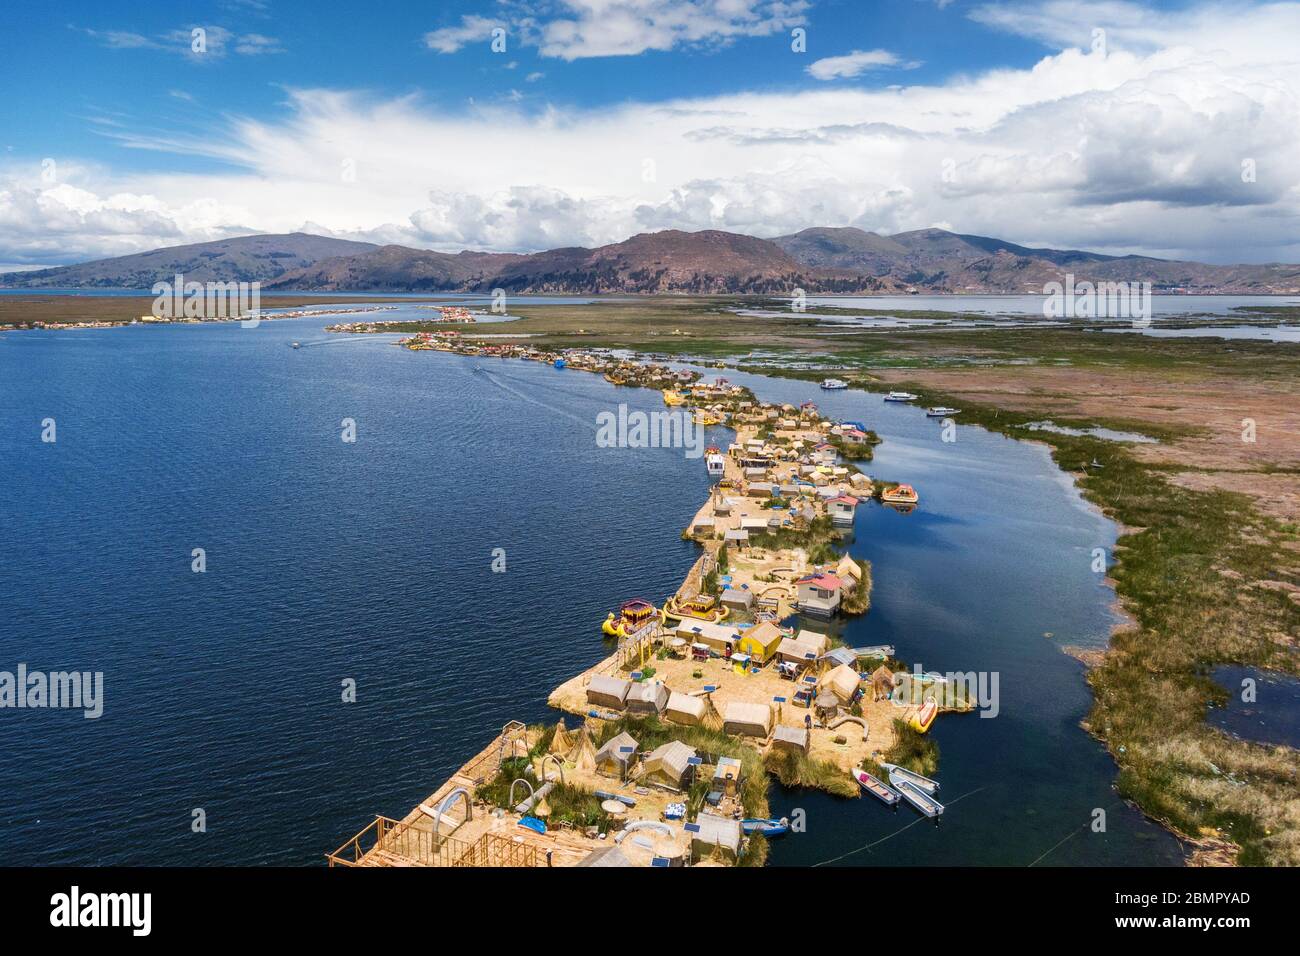 Aerial view of Uros Floating Islands on Lake Titicaca, the highest navigable lake in the world, in Peru, South America. Stock Photo